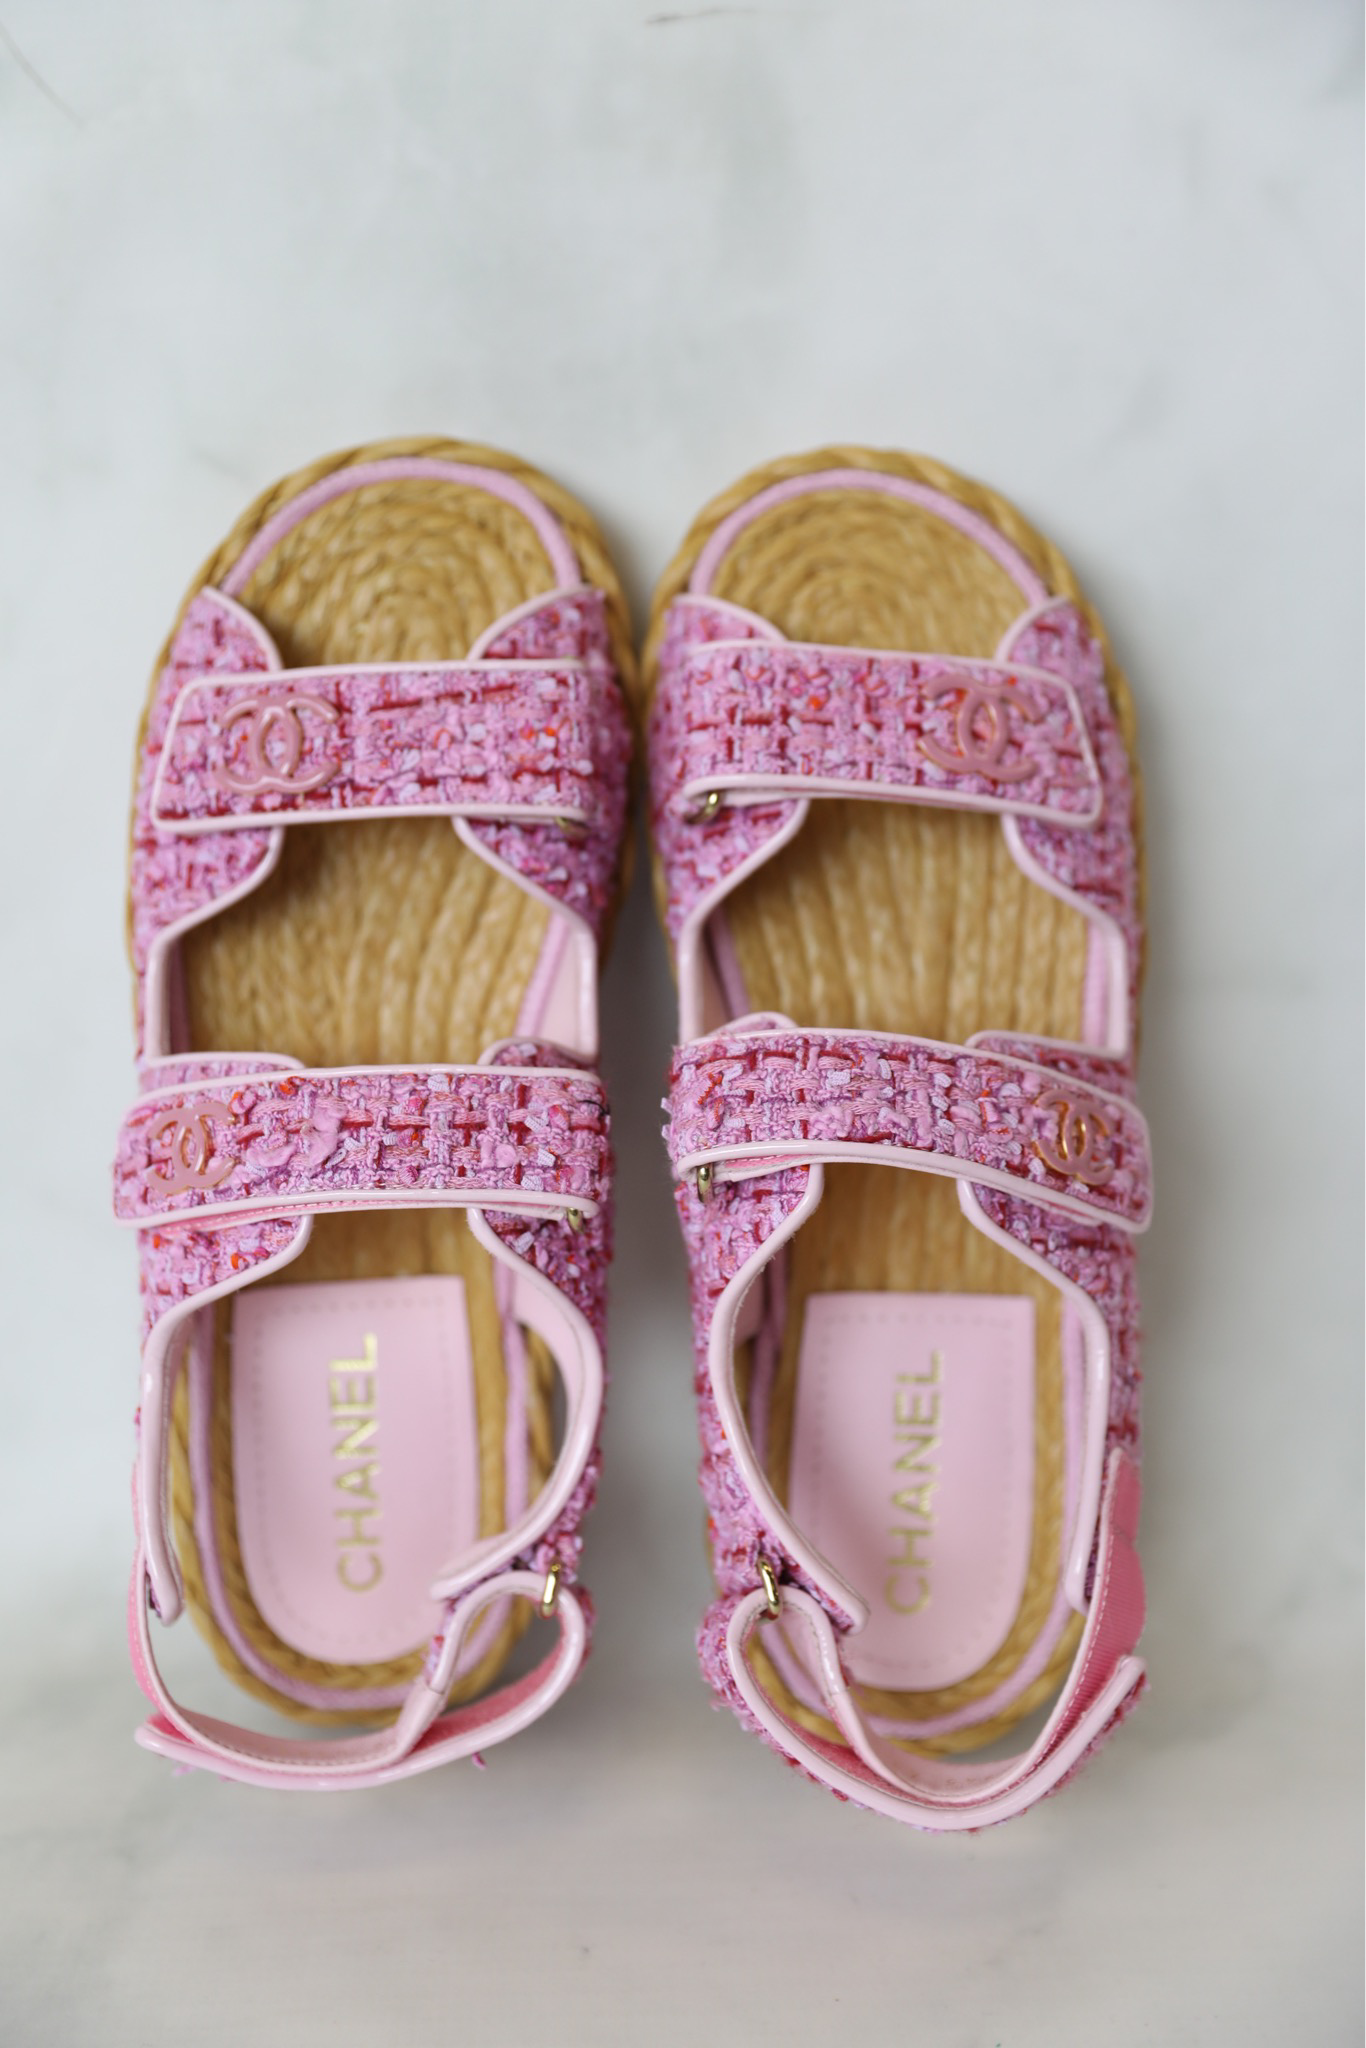 Chanel Sandals Dad Pink Tweed, Size 37, New in Box WA001